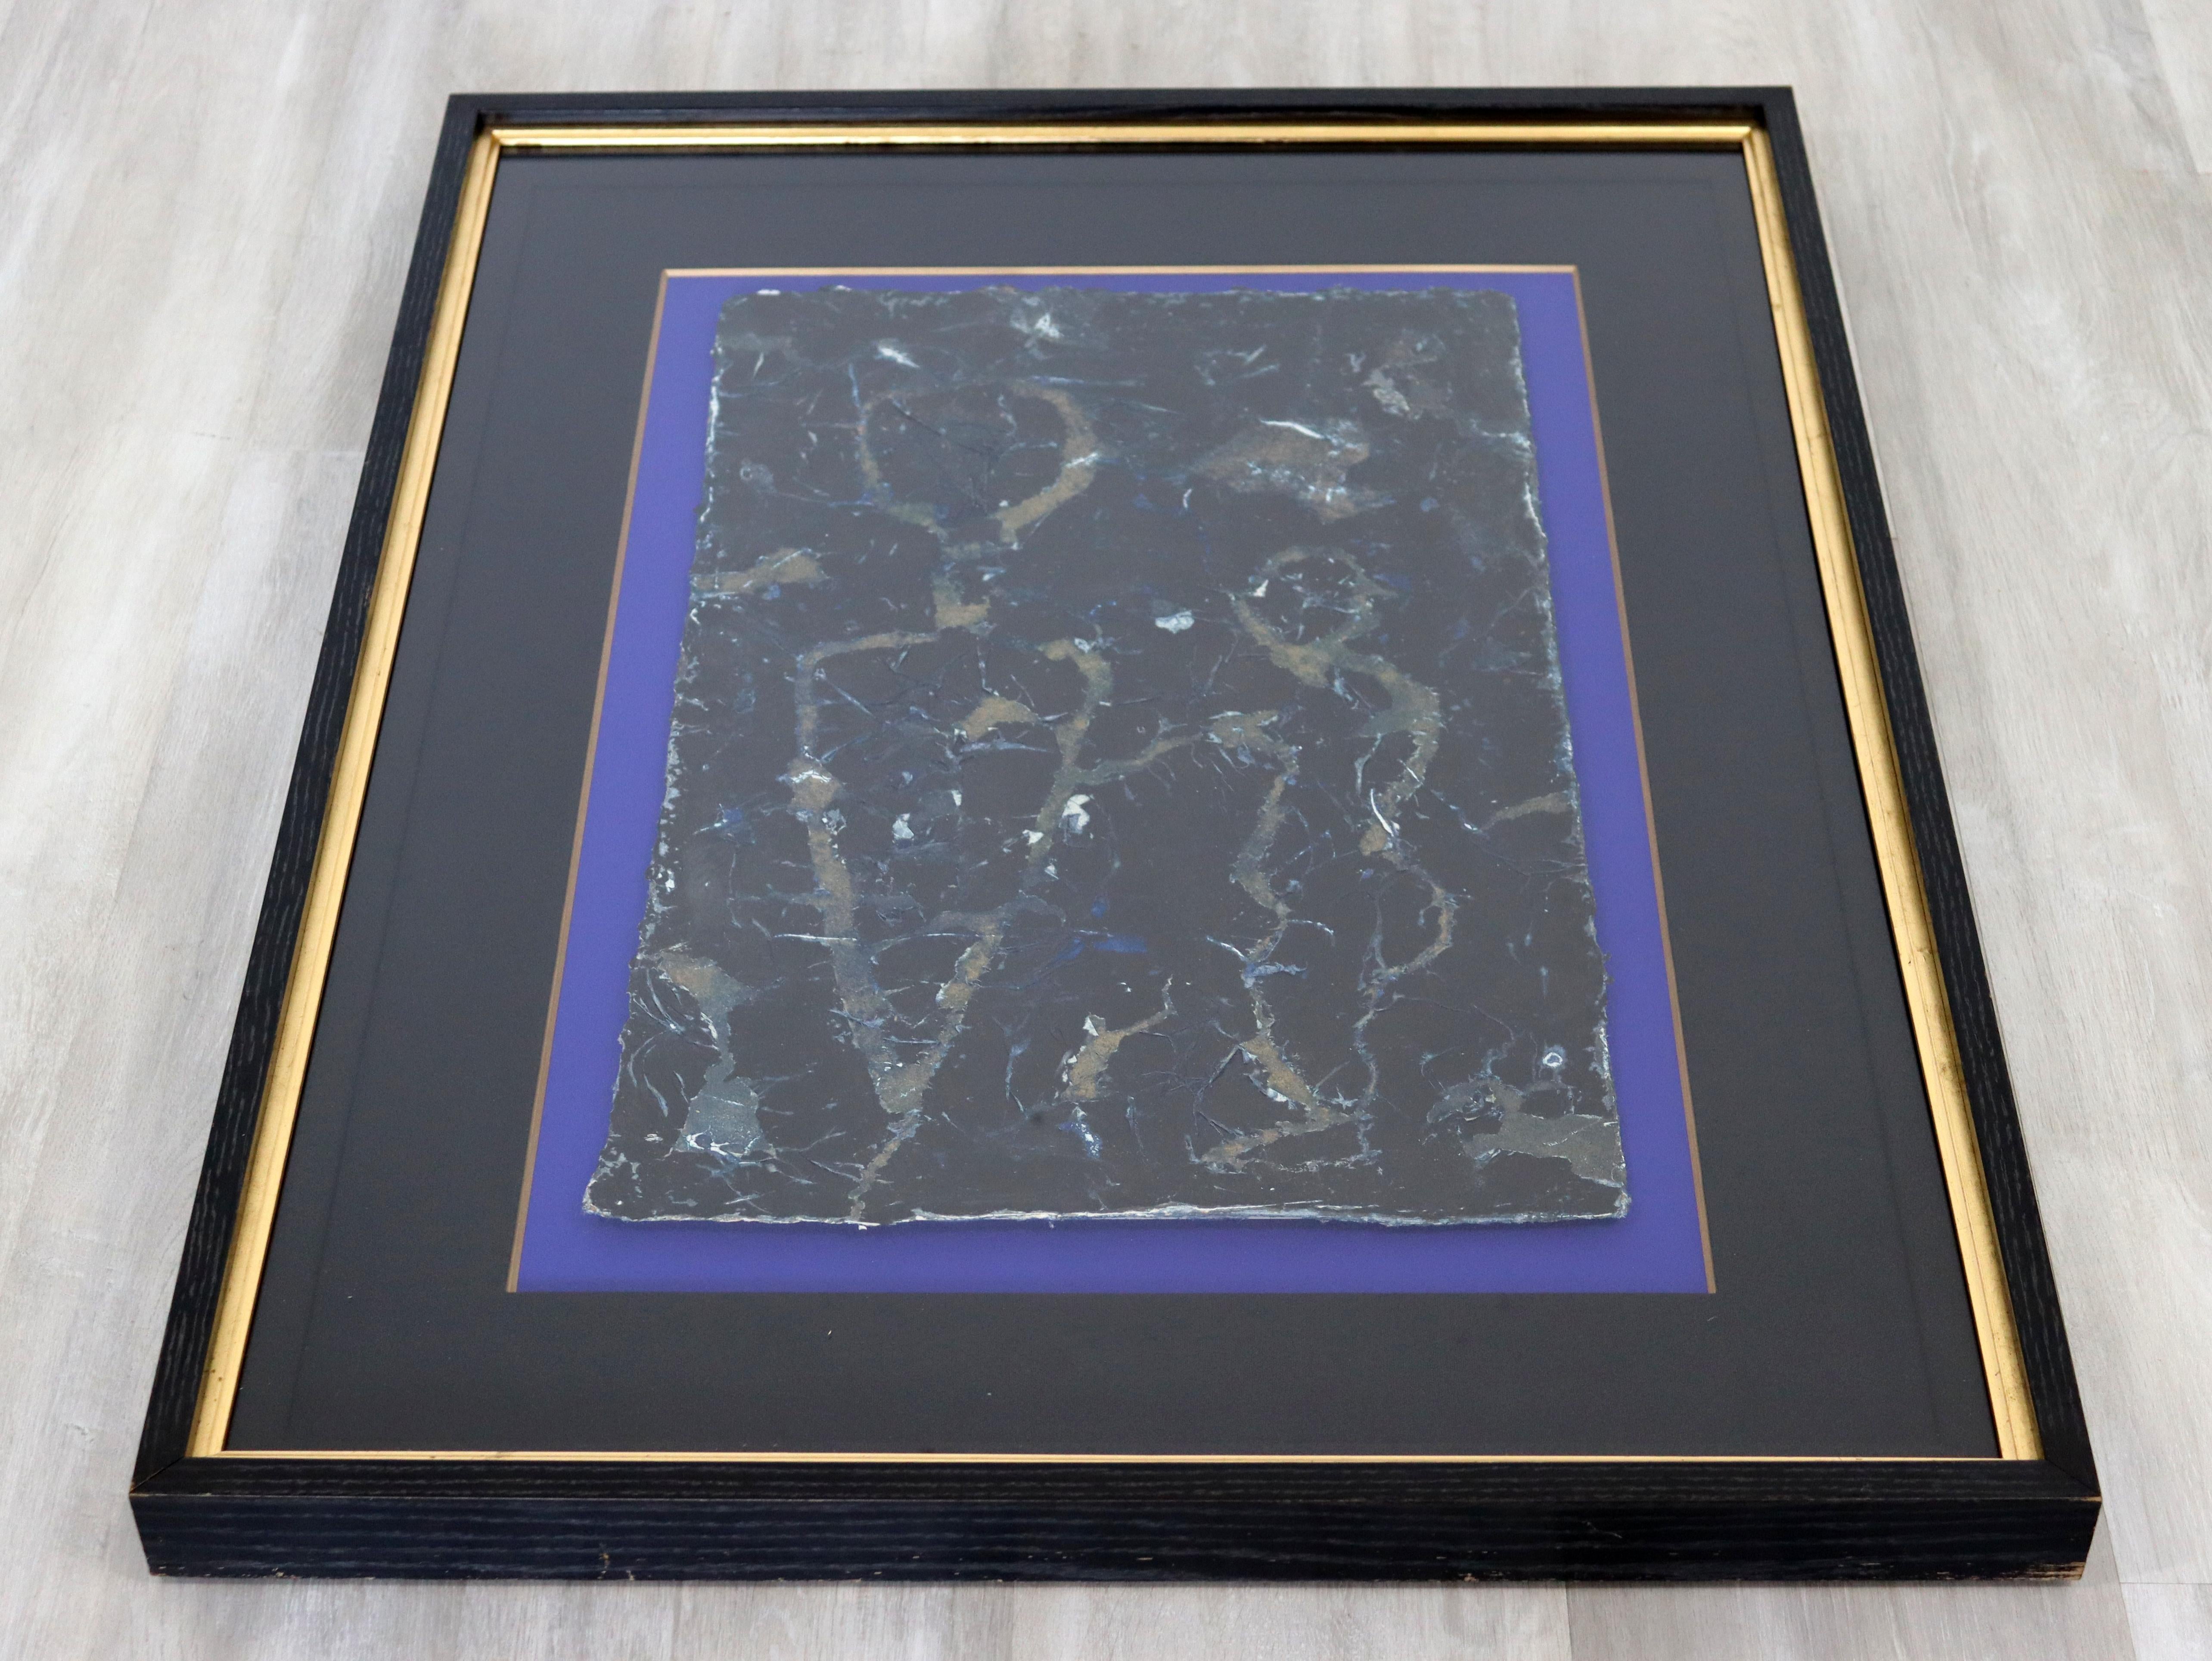 Late 20th Century Mid-Century Modern Framed Oil Paper Painting Petite Nuit Pierre Marie Brisson